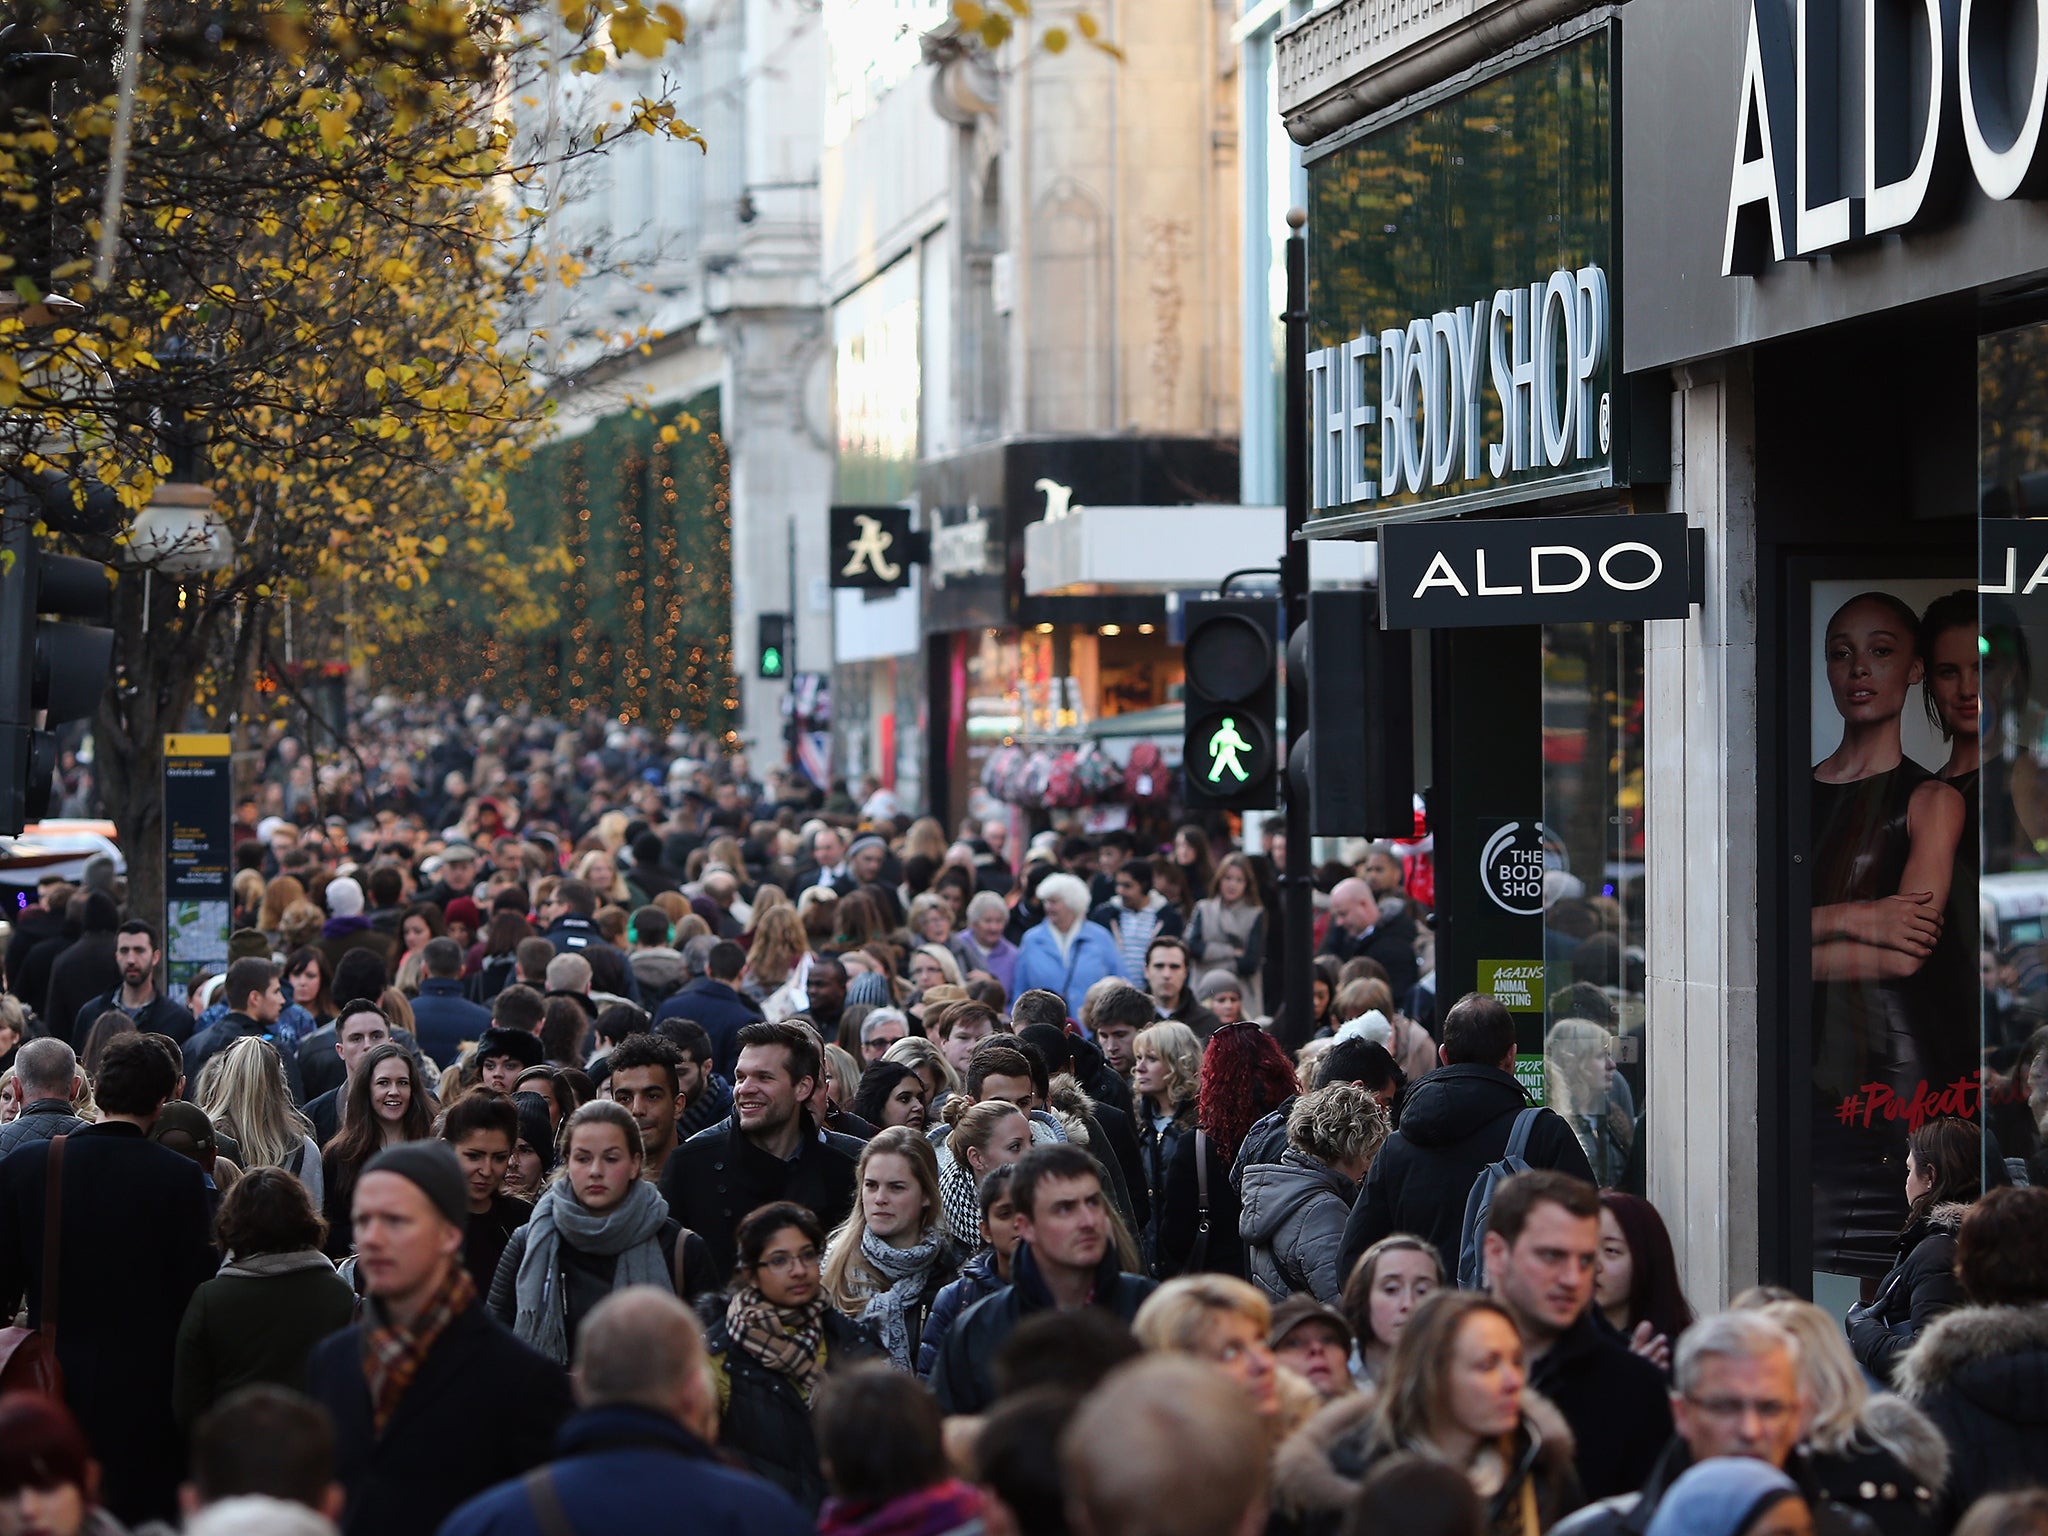 Consumers flood the shops on Oxford Street, London